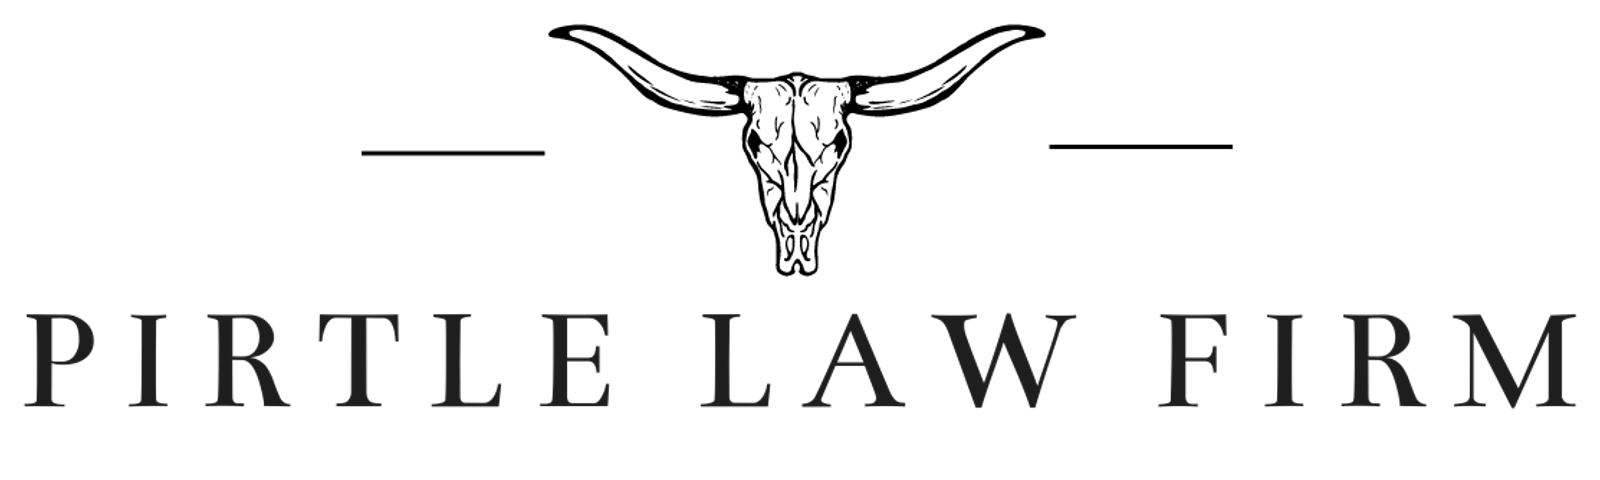 Pirtle Law Firm